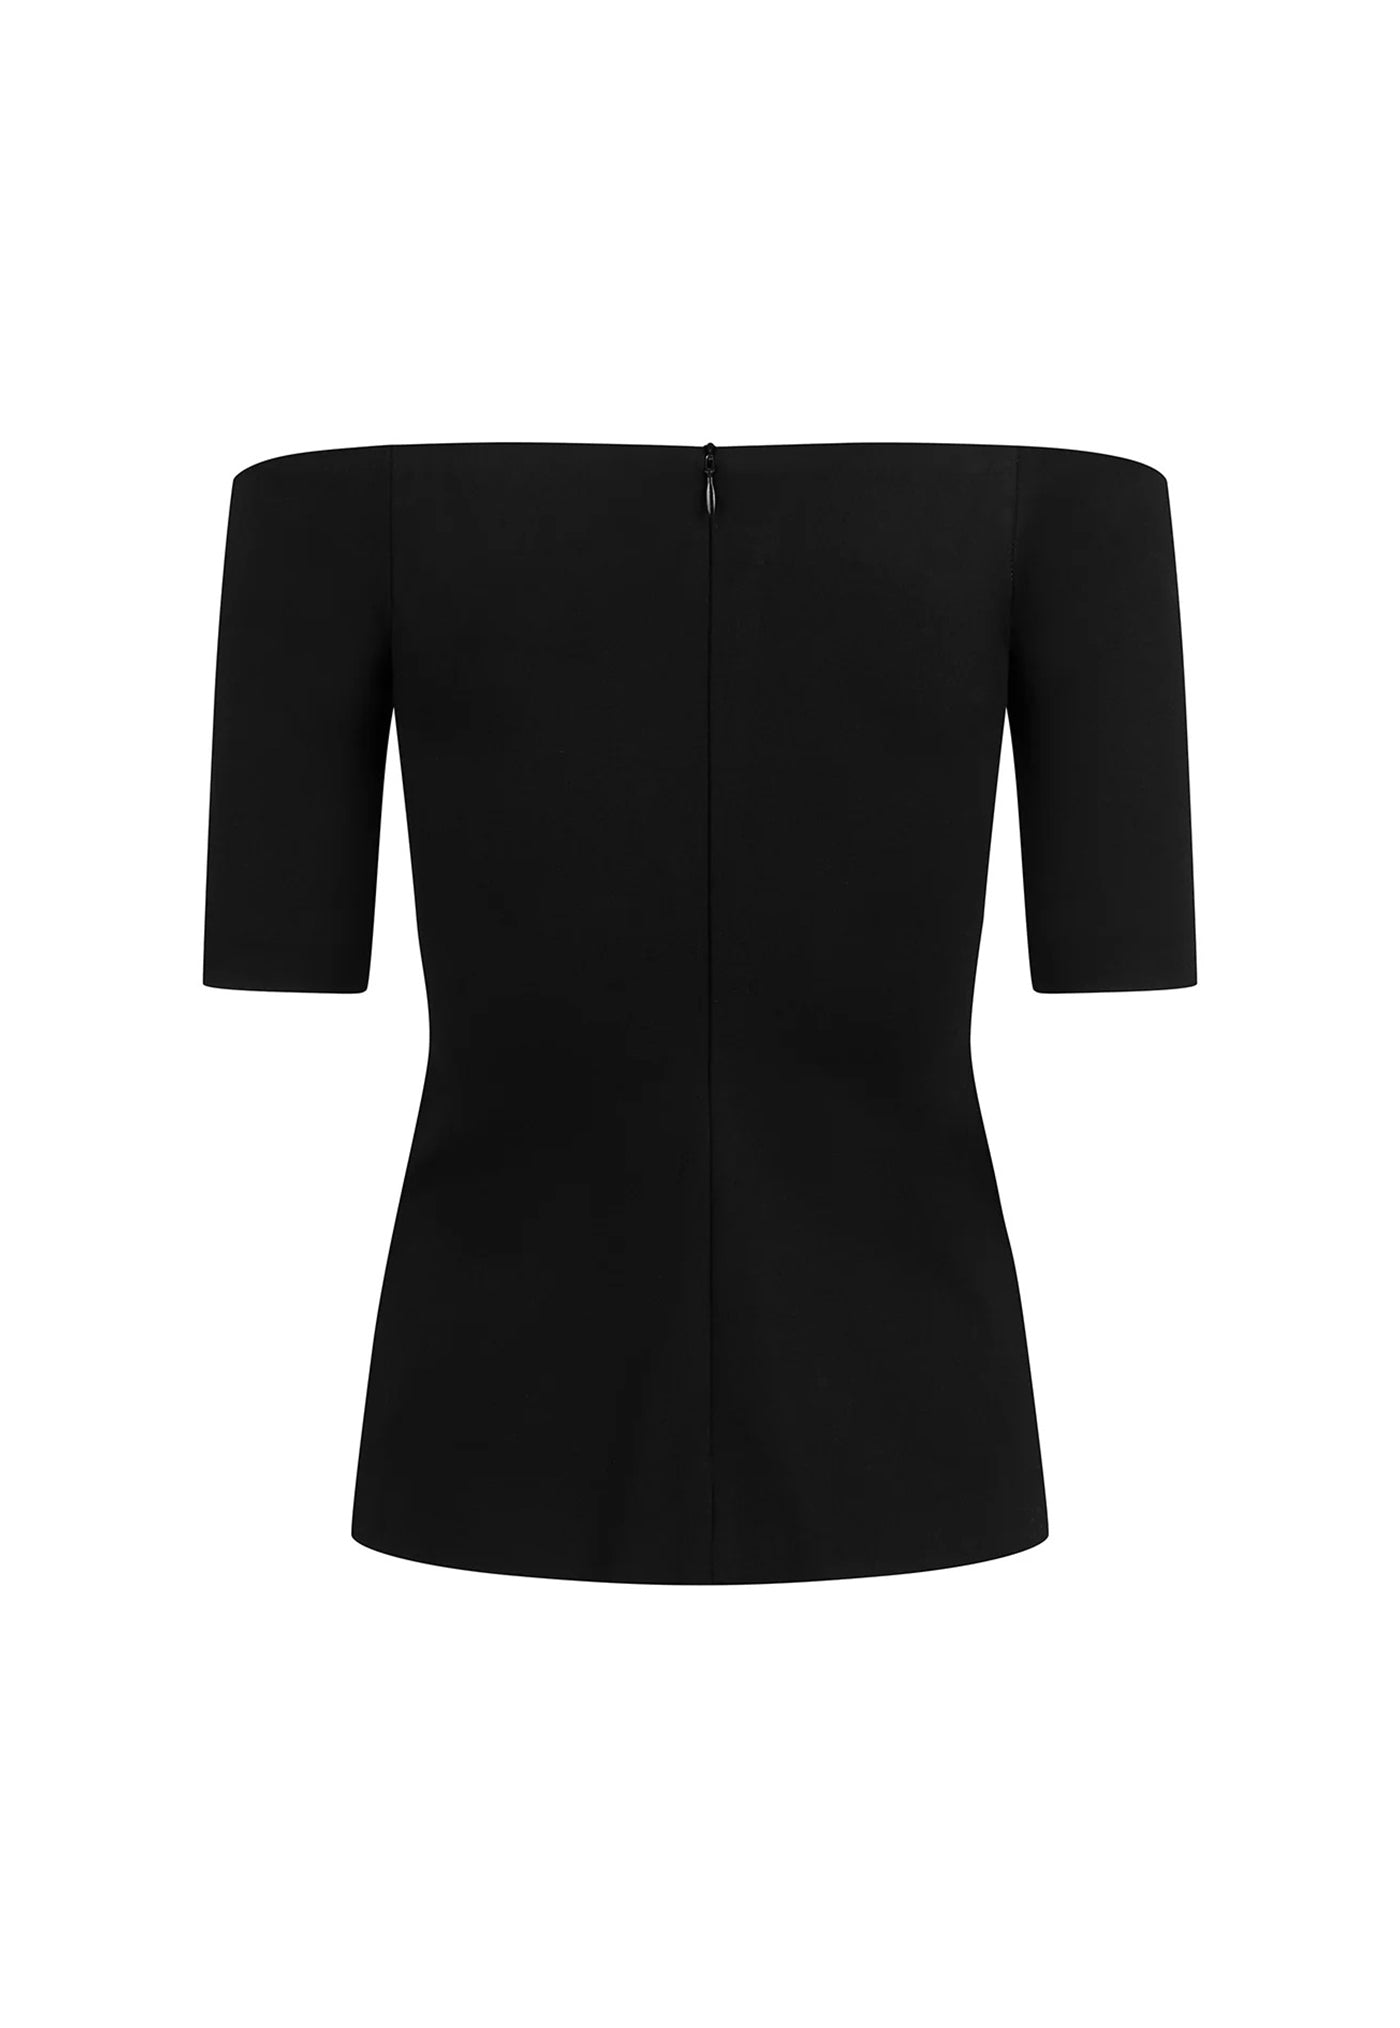 Paloma Top - Black sold by Angel Divine